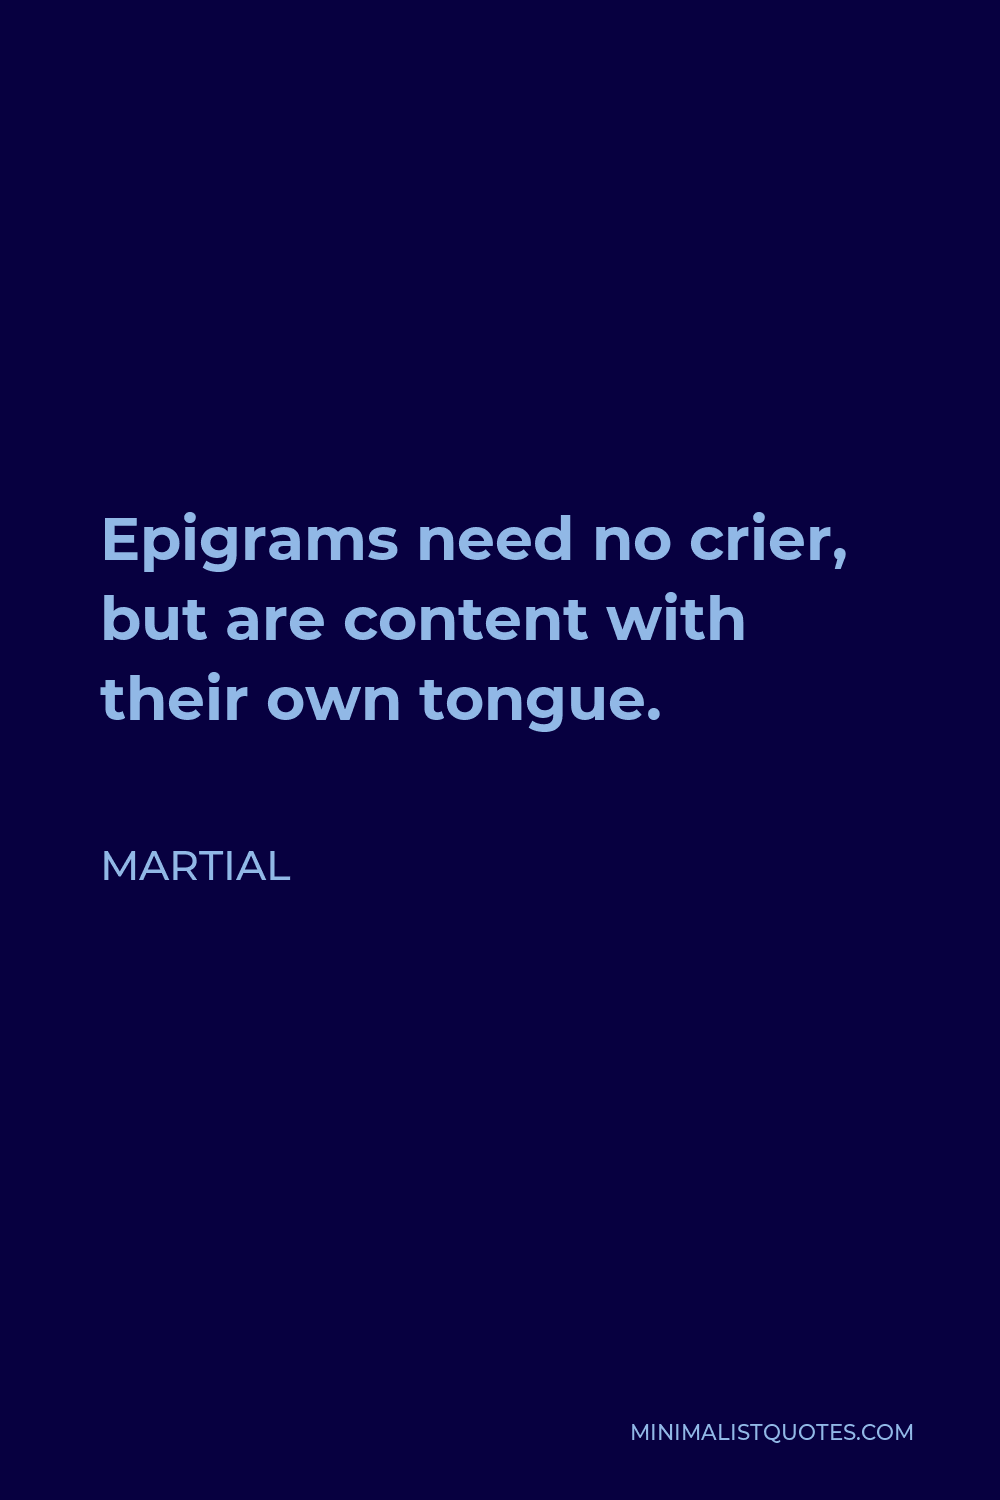 Martial Quote - Epigrams need no crier, but are content with their own tongue.